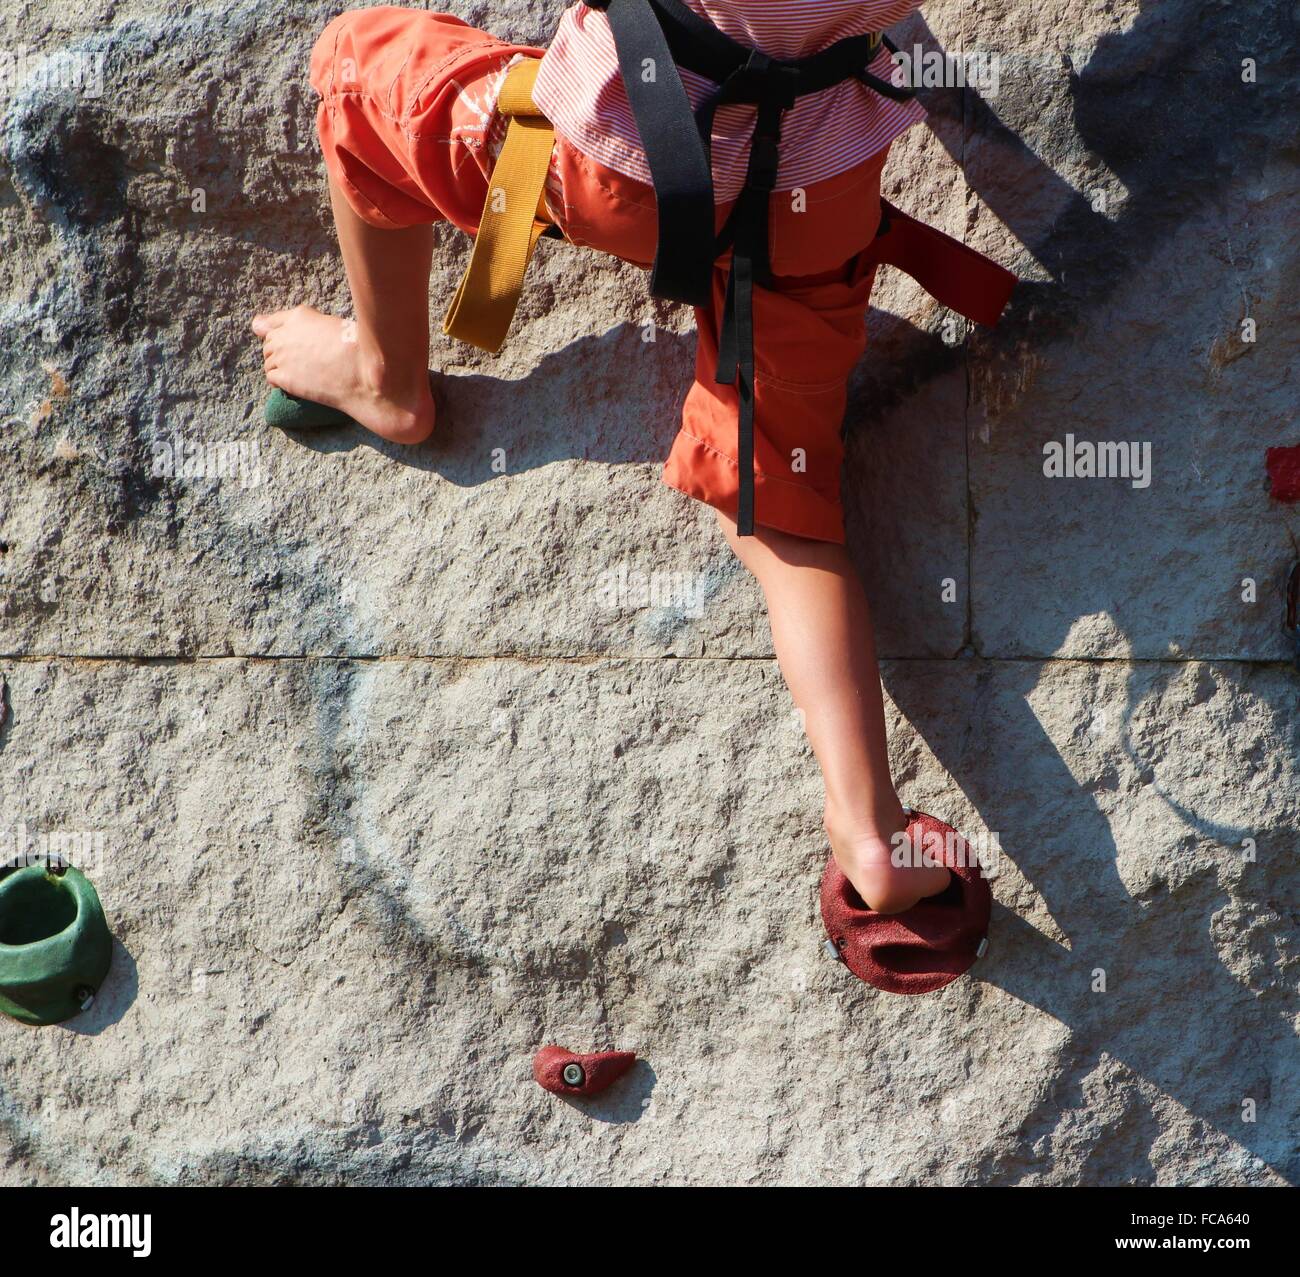 Child on a climbing face Stock Photo